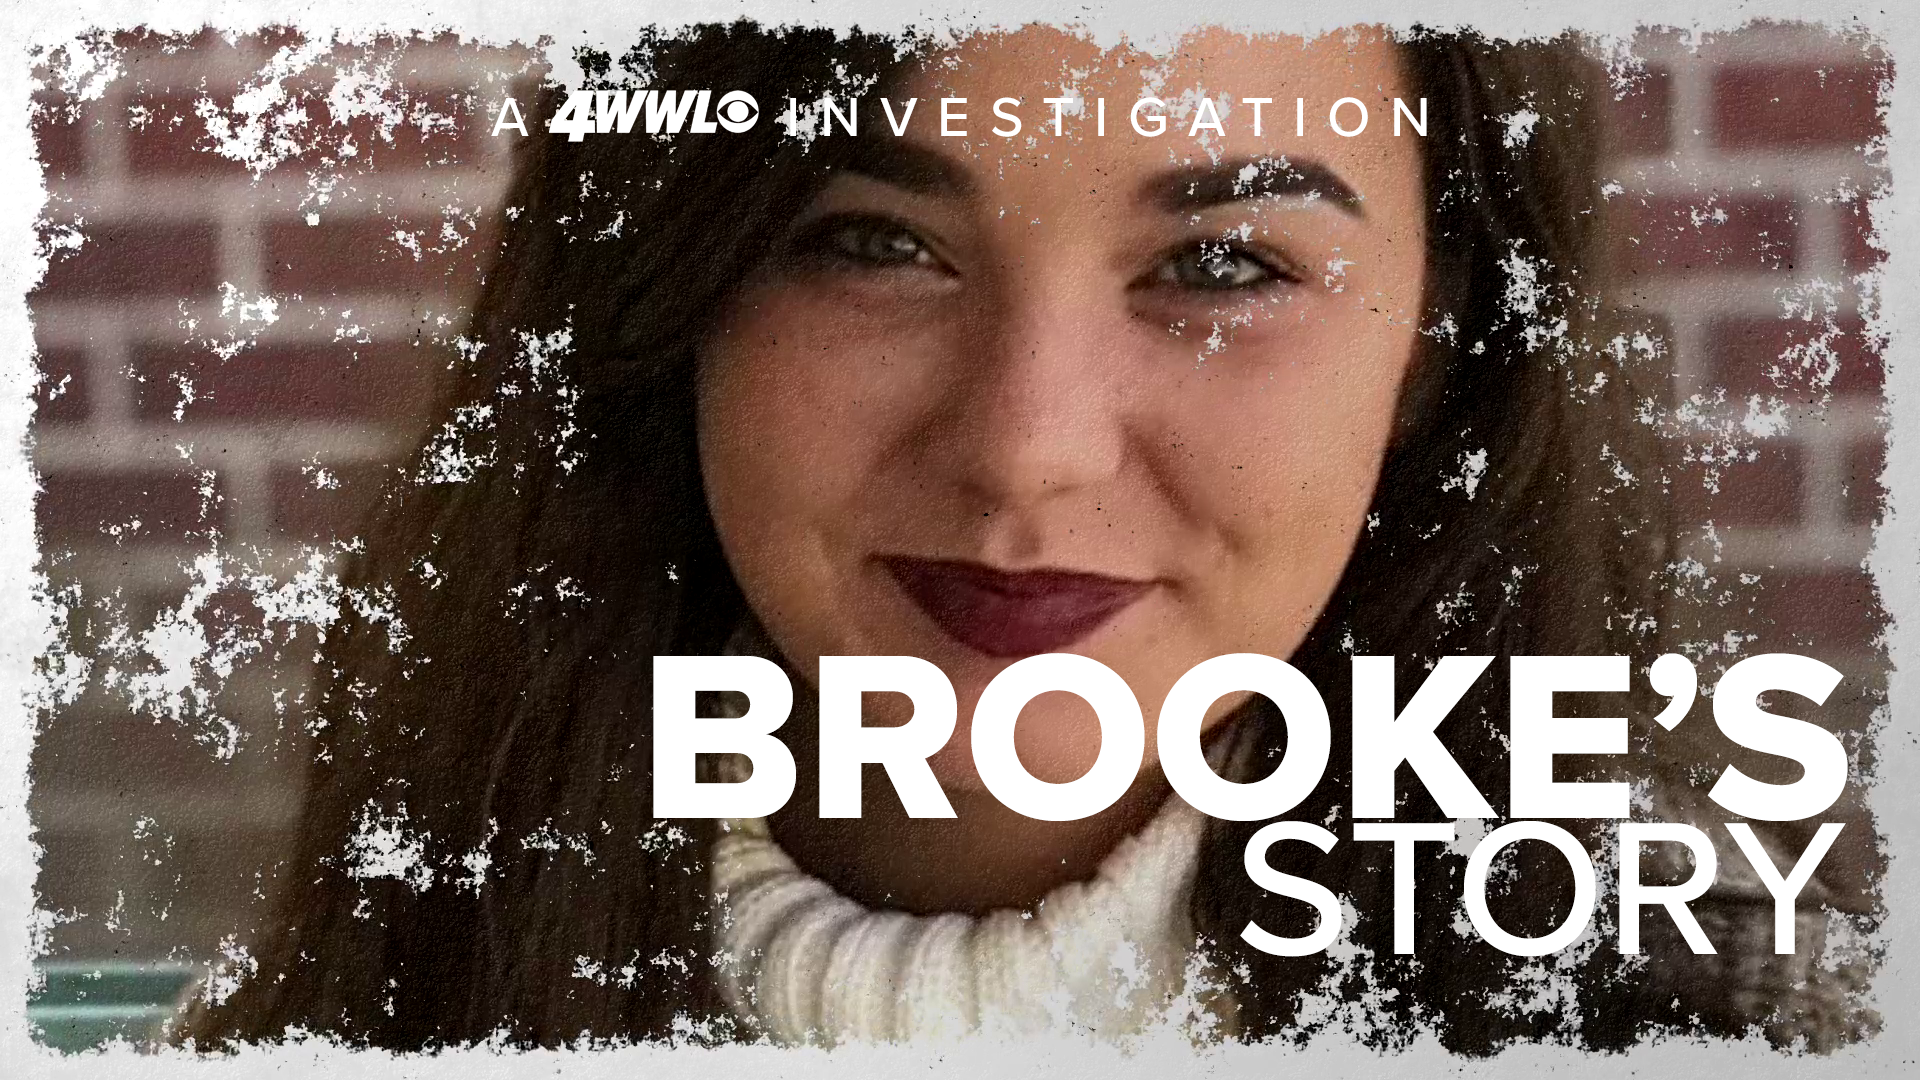 Brooke “Bee” Buchler's body was found inside the abandoned New Orleans Navy base weeks after meeting a man online. Her Slidell family is still searching for answers.